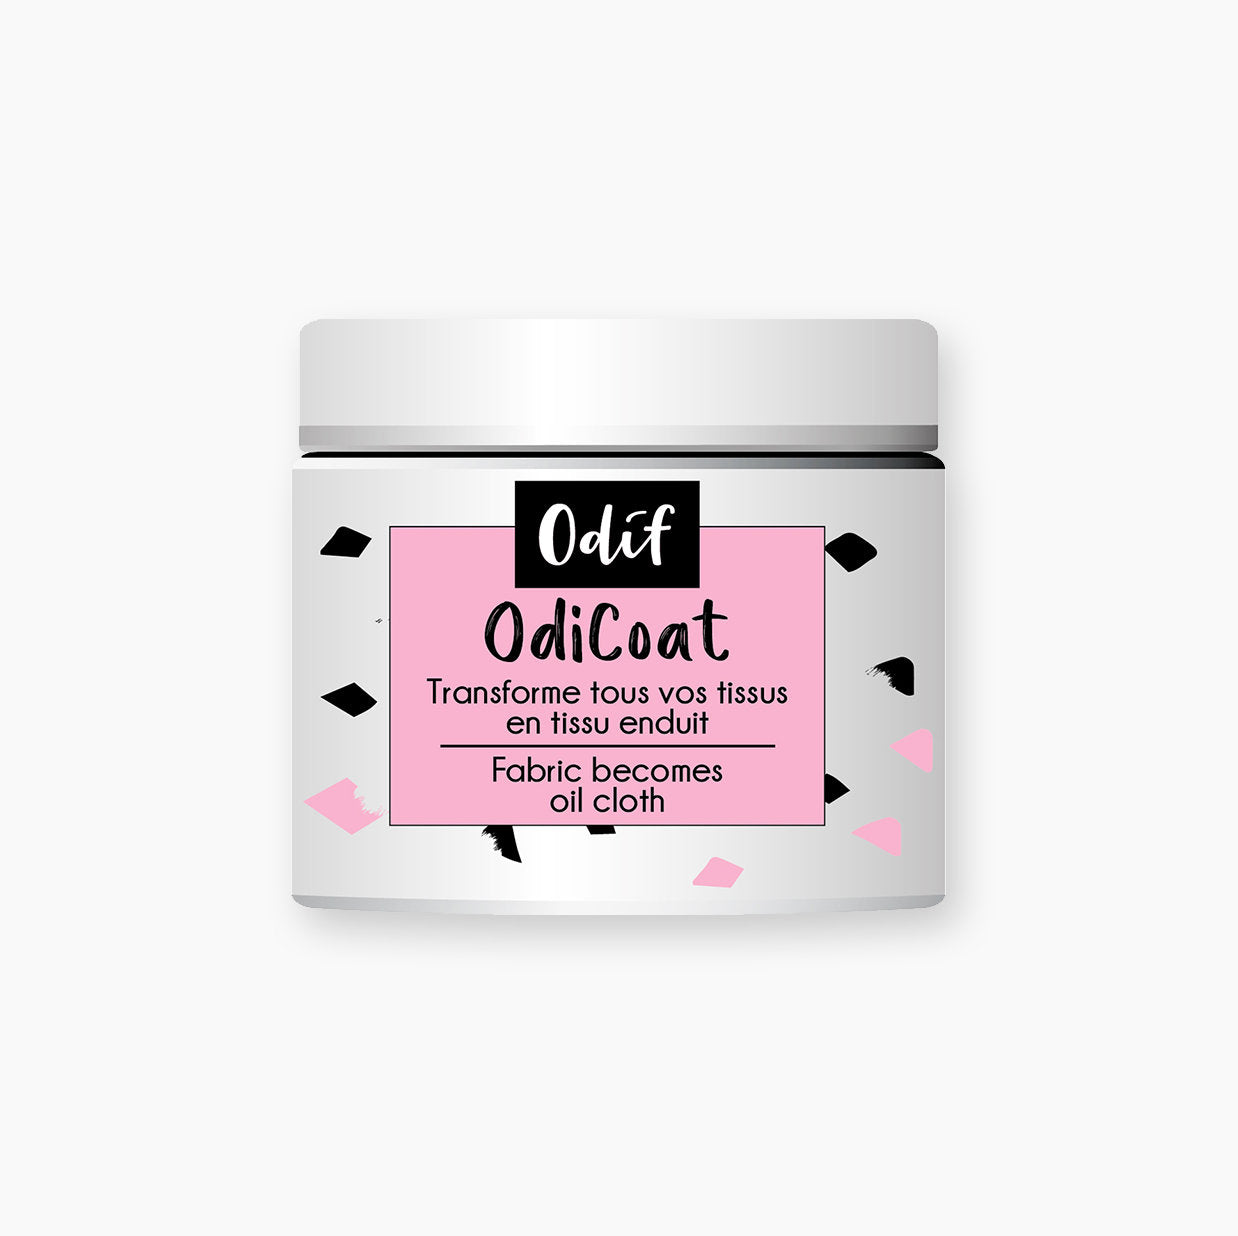 Odicoat Odif Waterproofing Gel for Fabric 250ml - Waterproof finish for your sewing projects